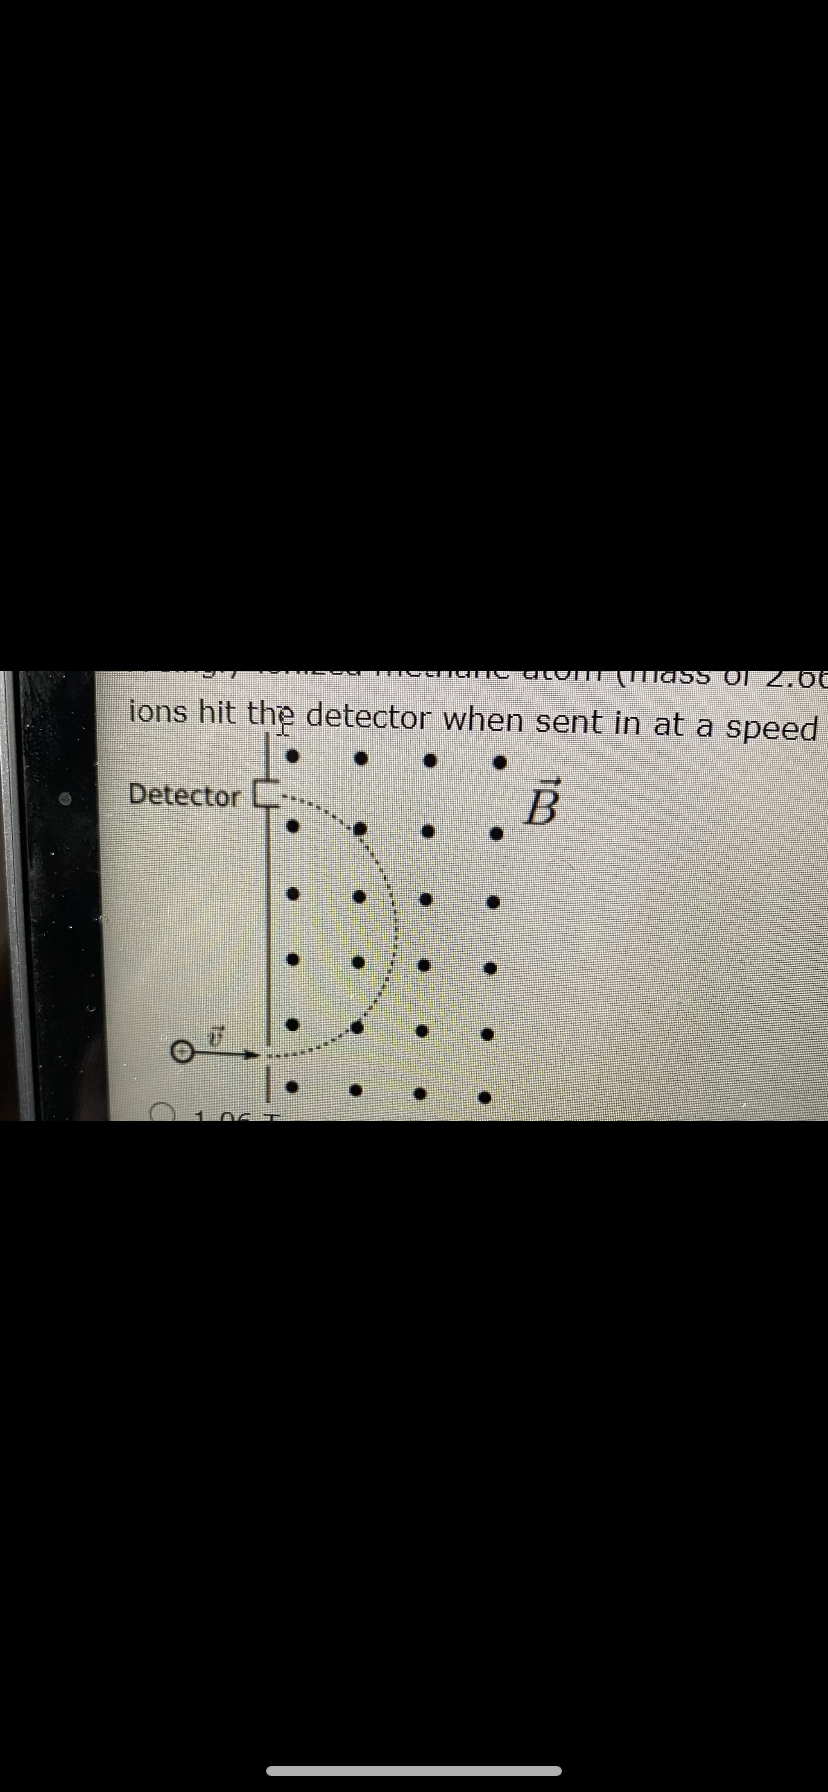 ions hit the detector when sent in at a speed
Detector
